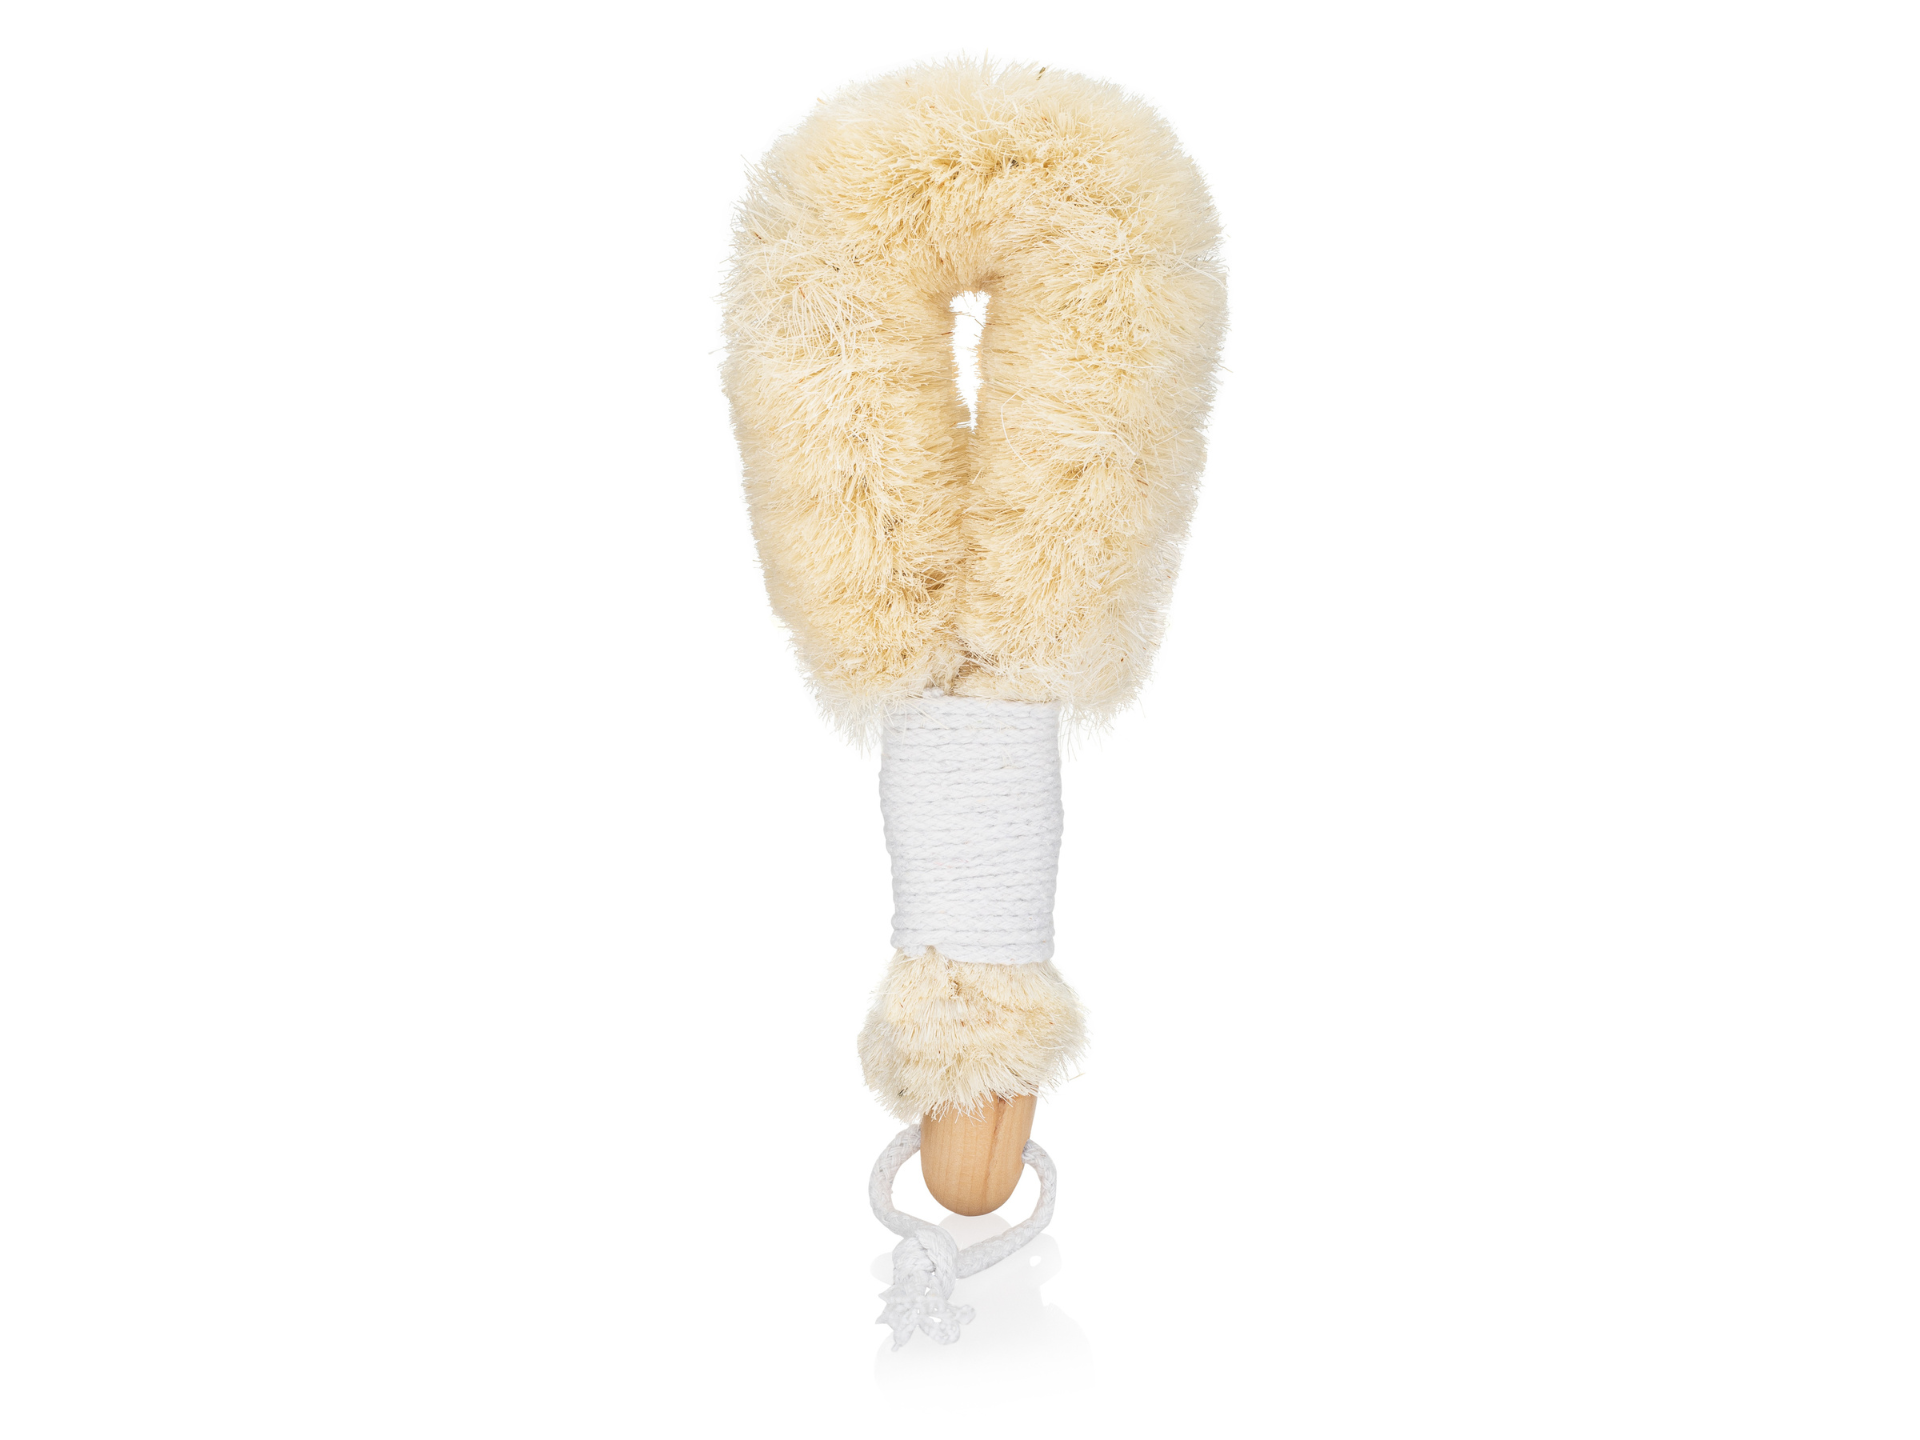 Scrub Brush - Natural Sisal in two different sizes - Bitter Salty Sour Sweet